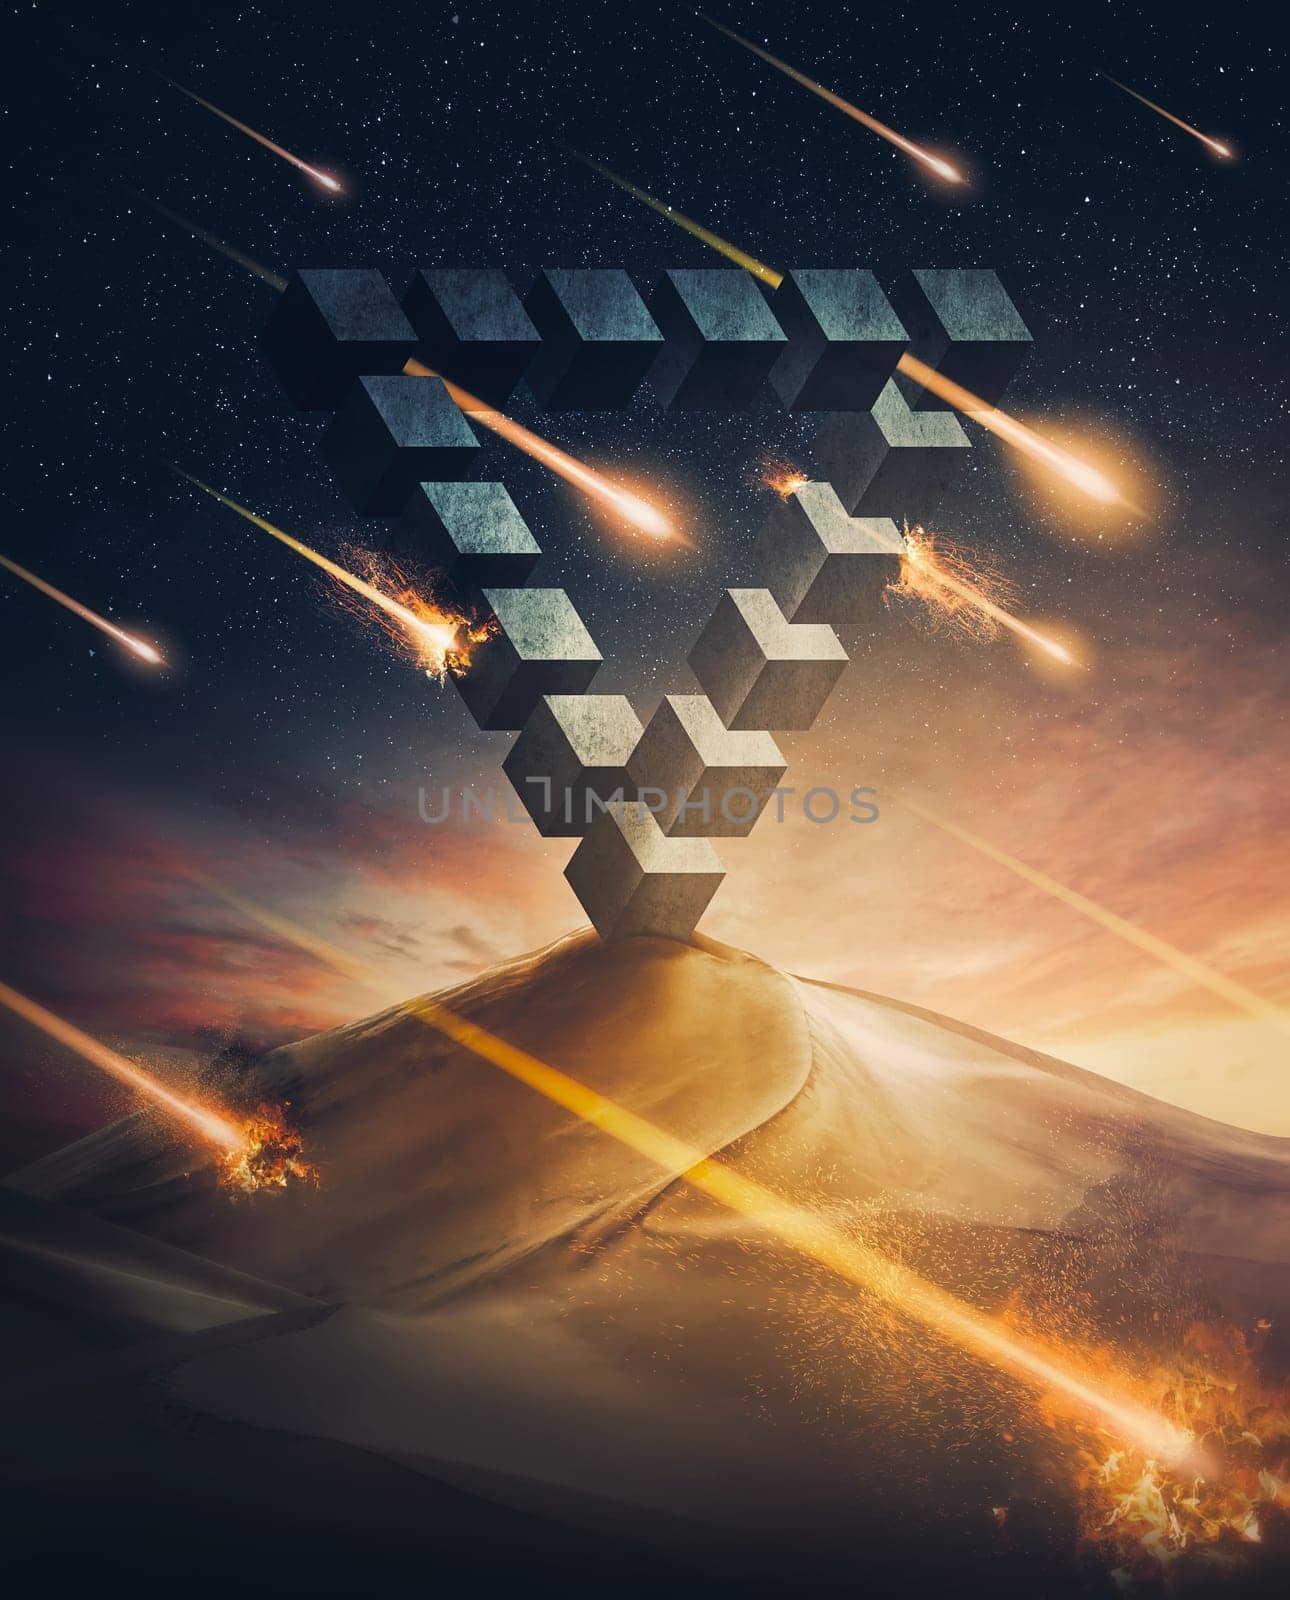 Meteor shower falling on another planet on a faraway galaxy. Abstract shape alien construction, penrose triangle shape, in the middle of a desert bombarded by comets. Surreal cosmic background by psychoshadow